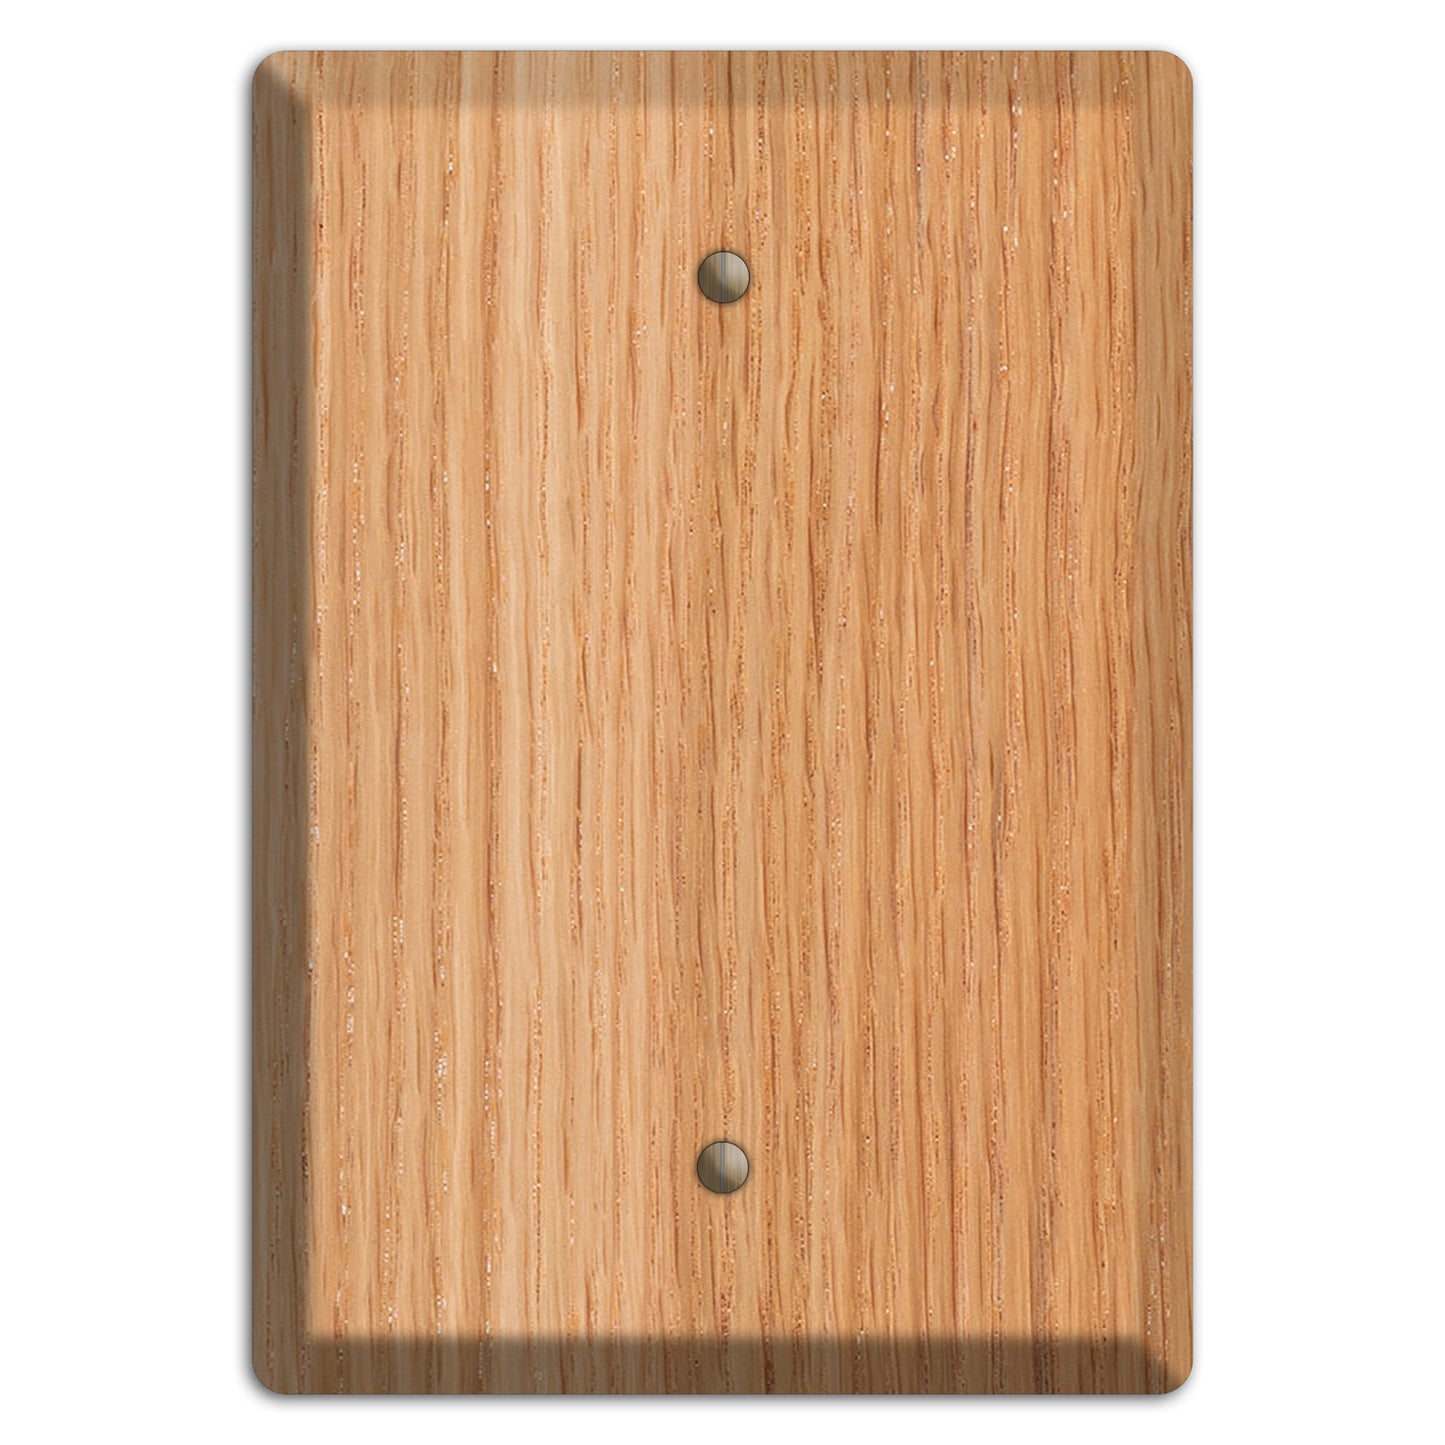 Unfinished Red Oak Wood Single Blank Cover Plate